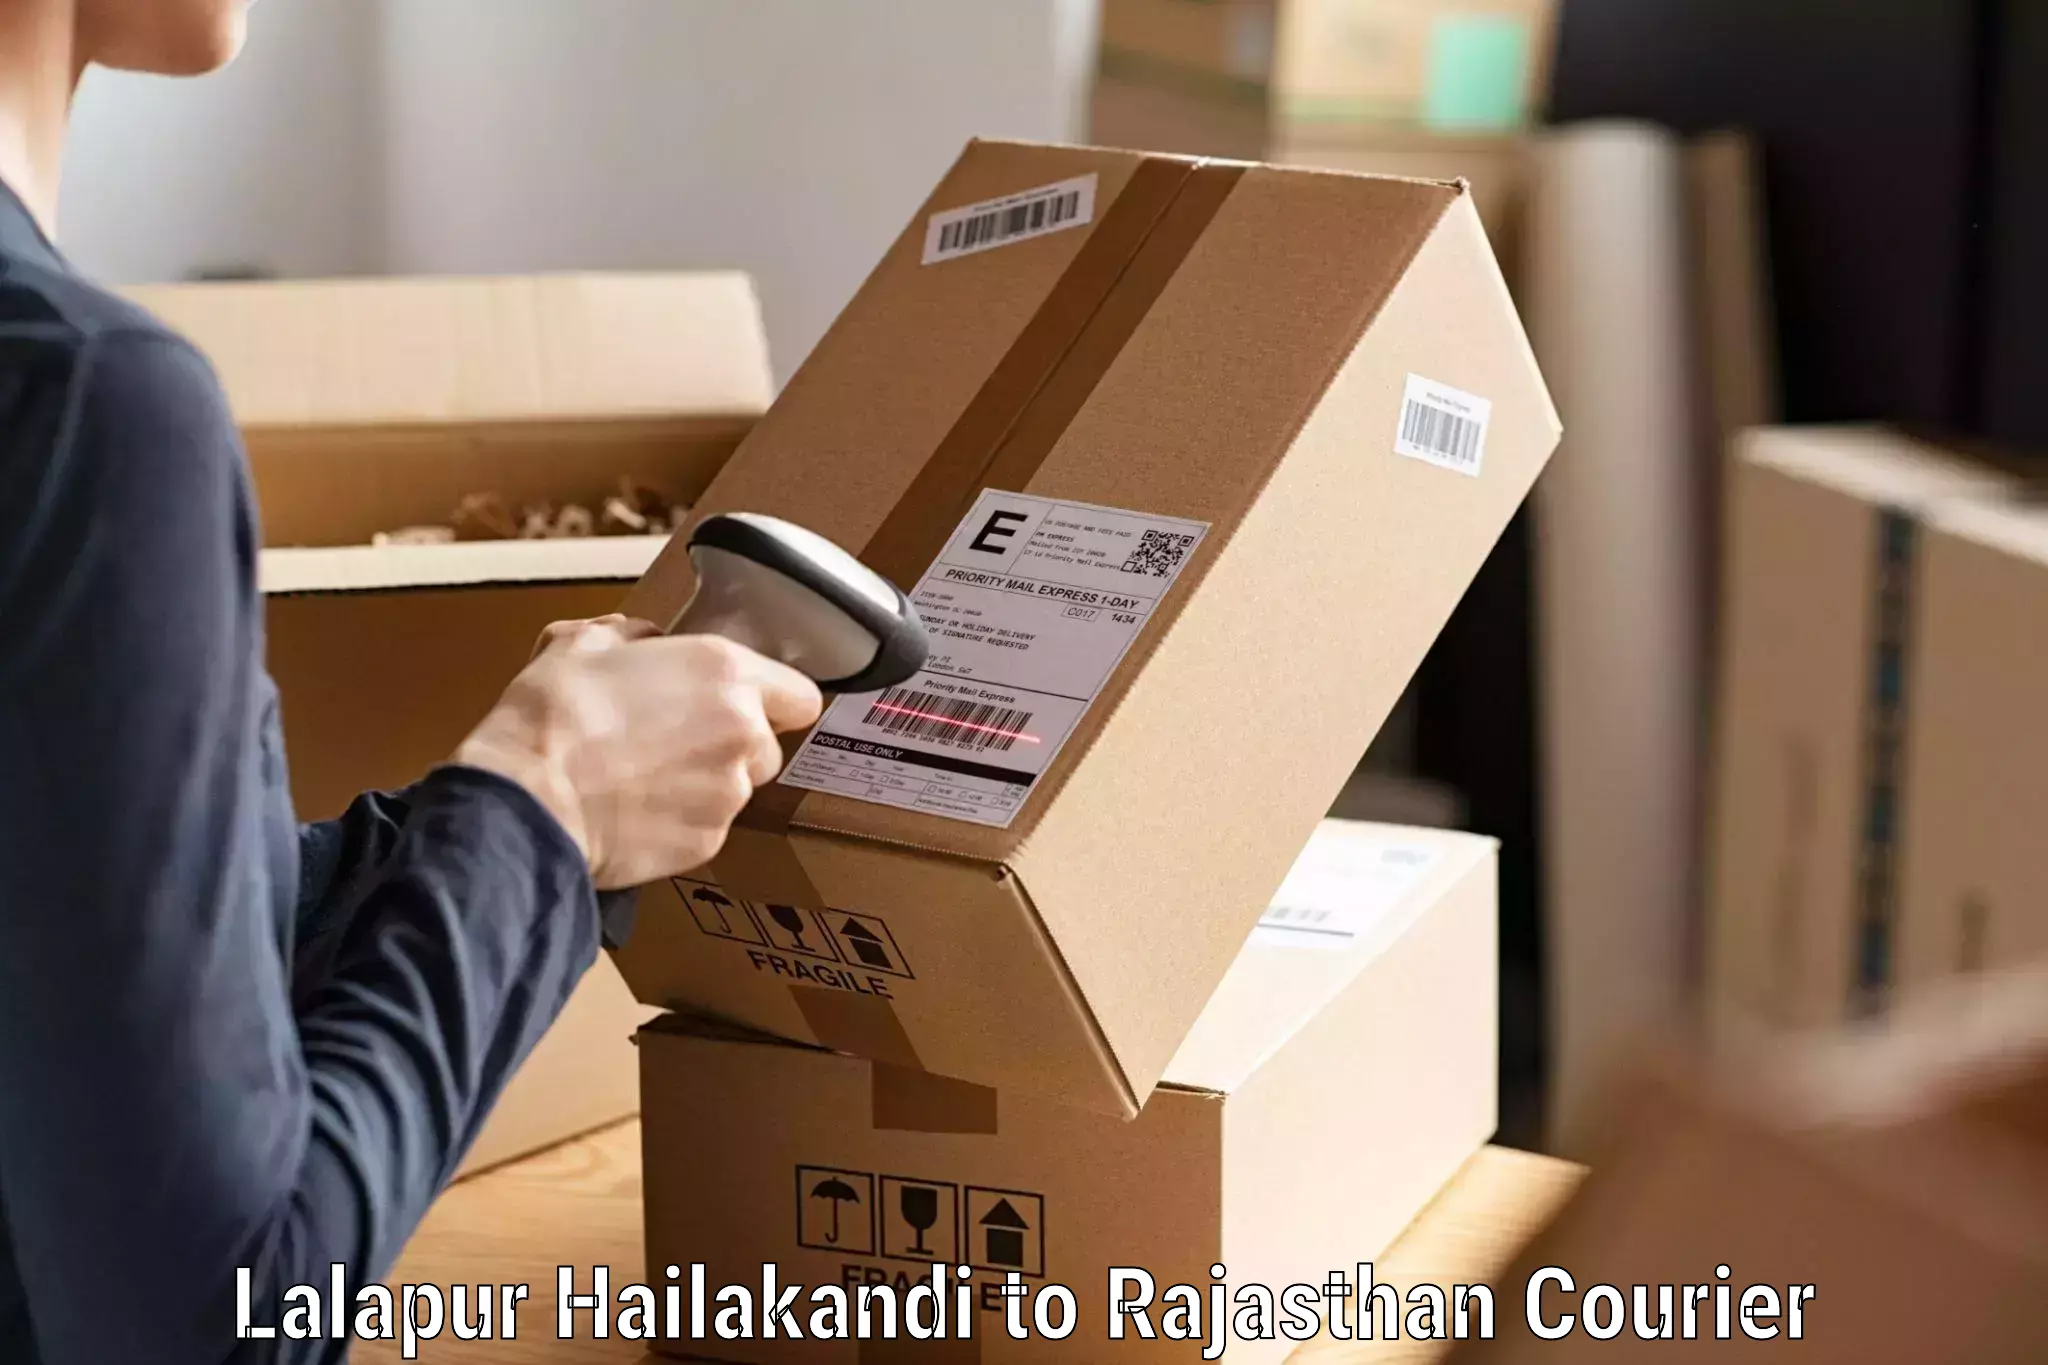 Courier service innovation in Lalapur Hailakandi to Yeswanthapur